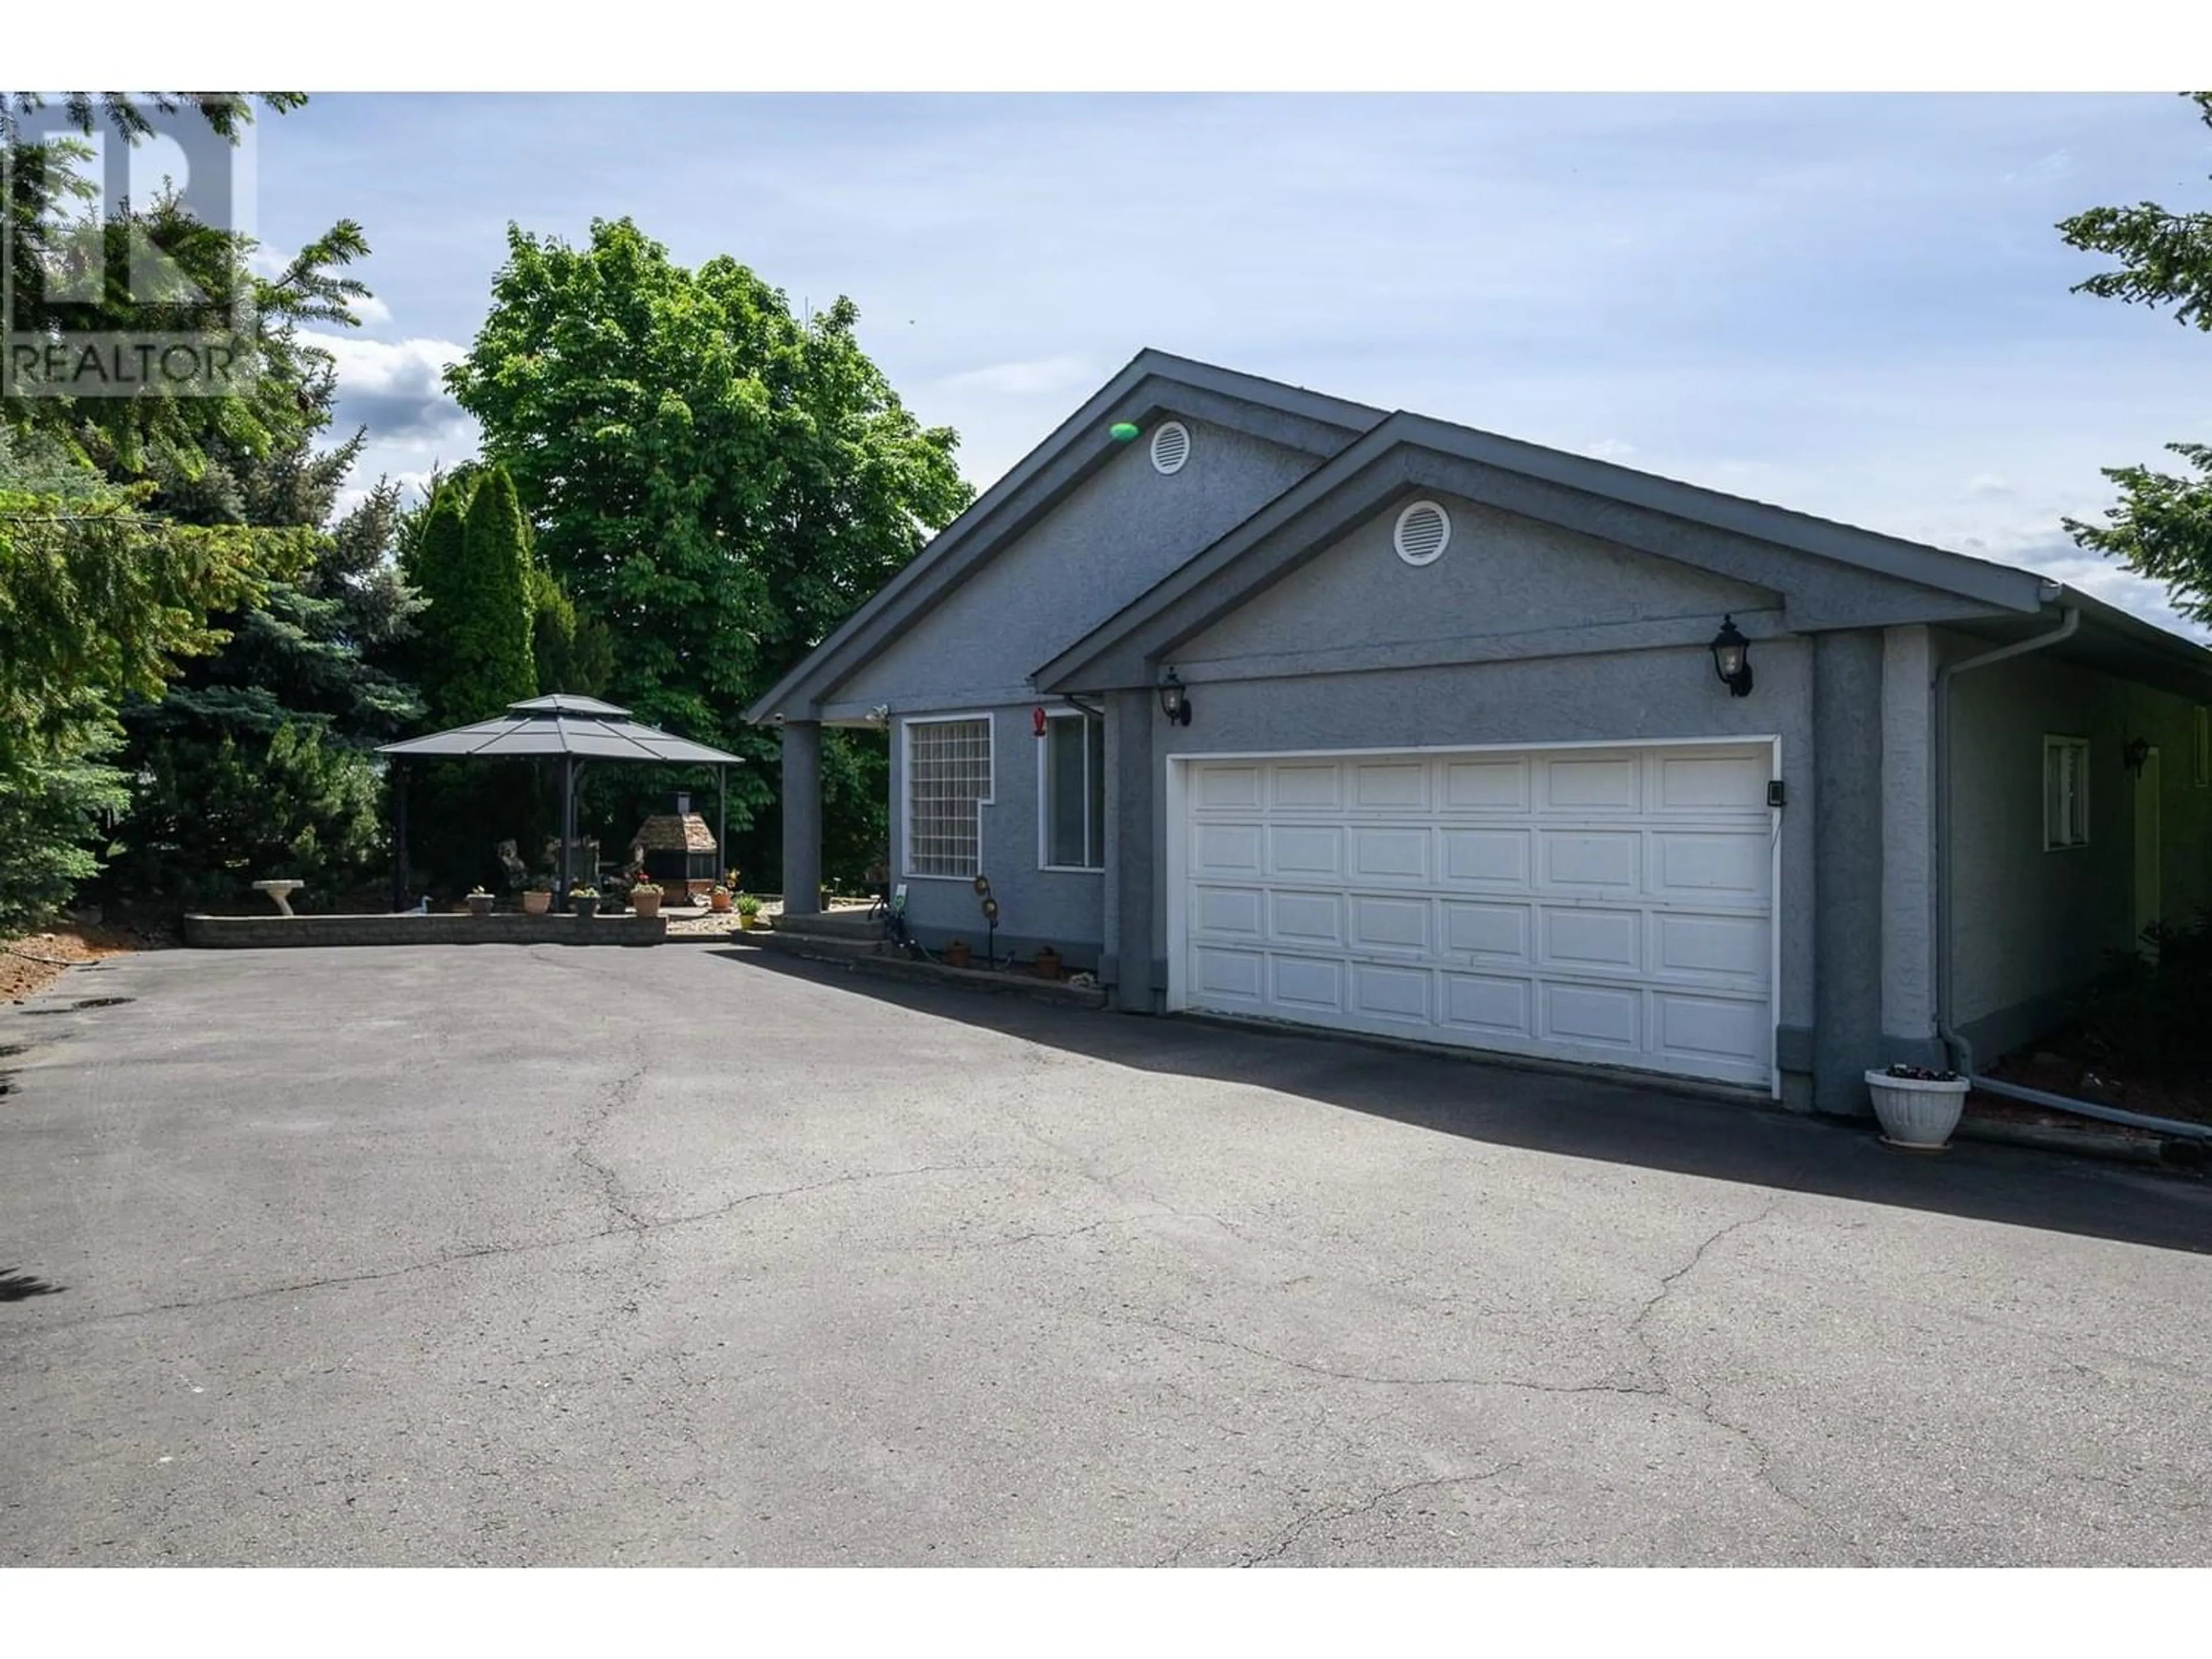 A pic from exterior of the house or condo for 9802 Buchanan Road, Coldstream British Columbia V1B3B6